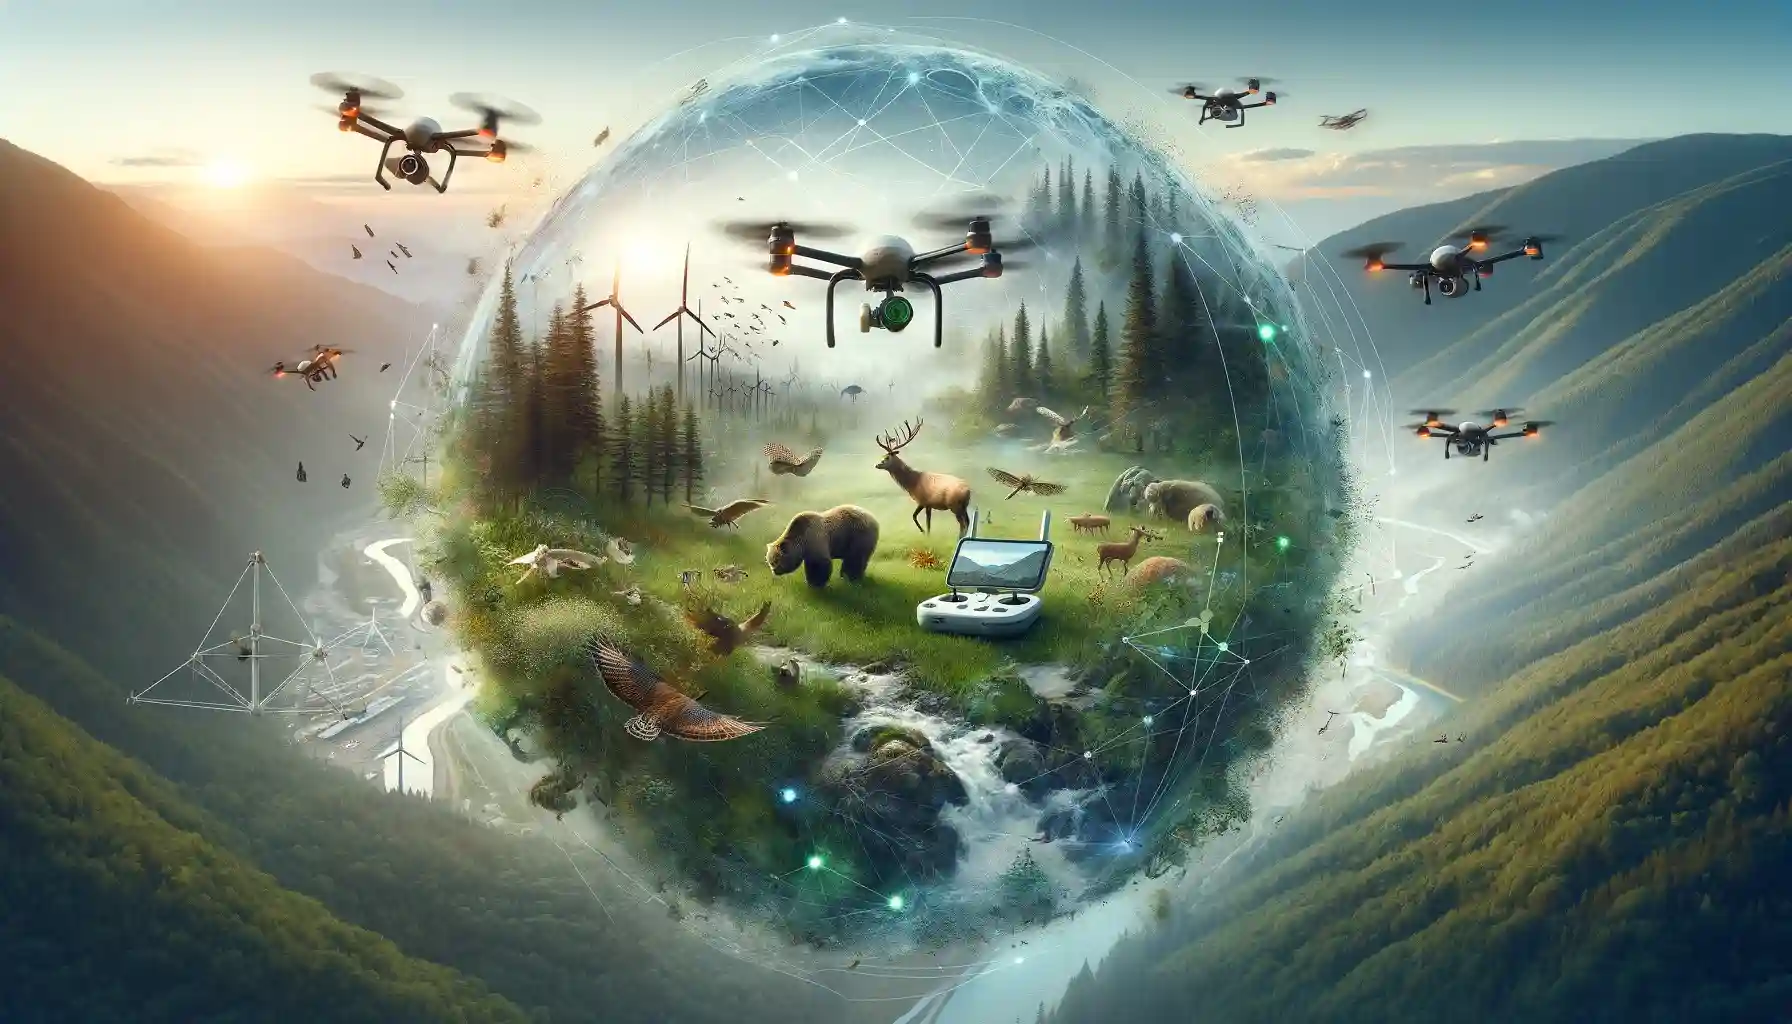 Mini Drones and Environment